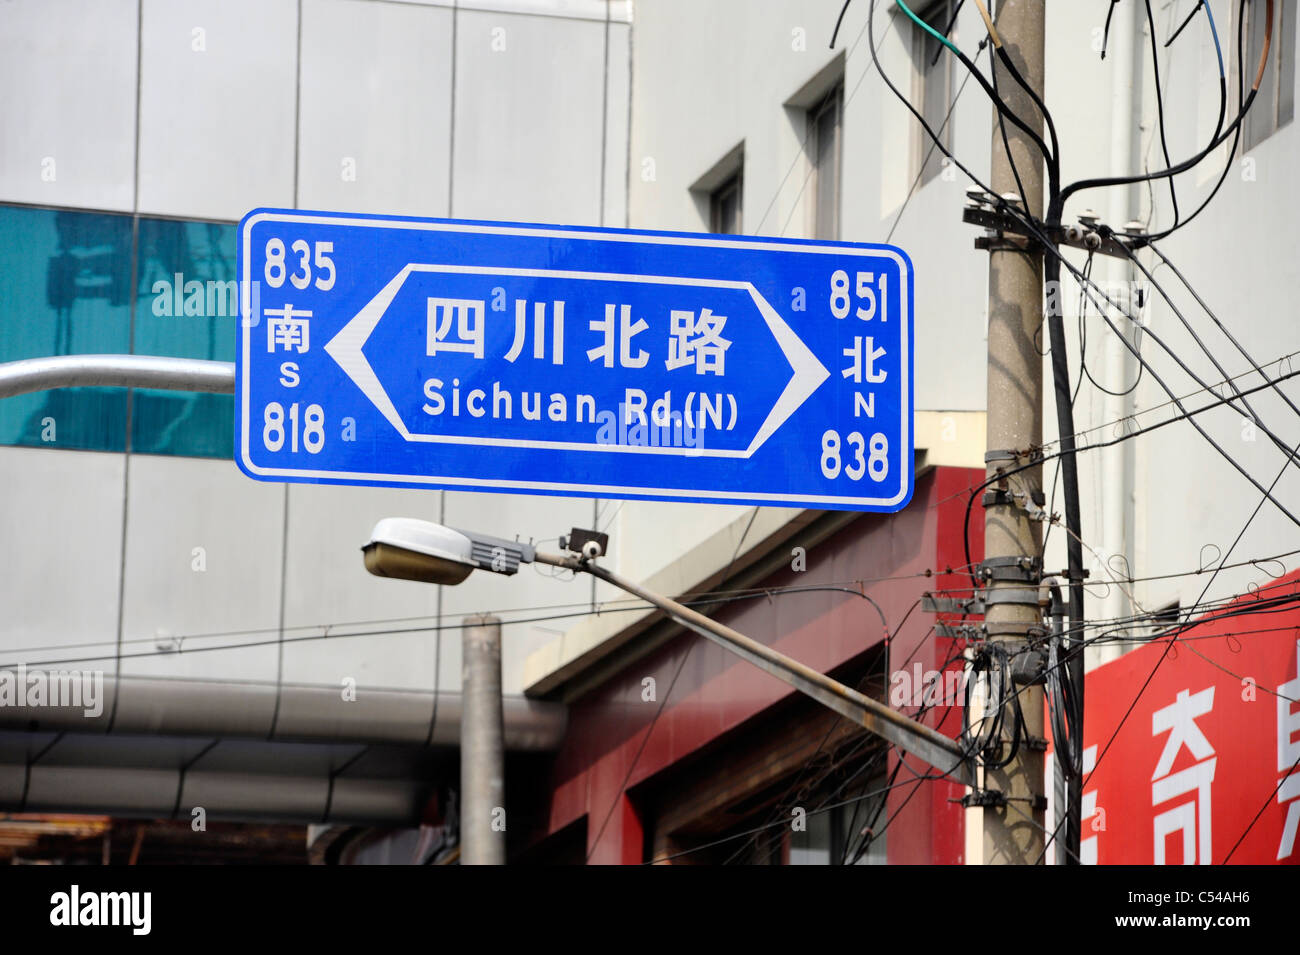 Sichuan road street sign in Shanghai. Stock Photo